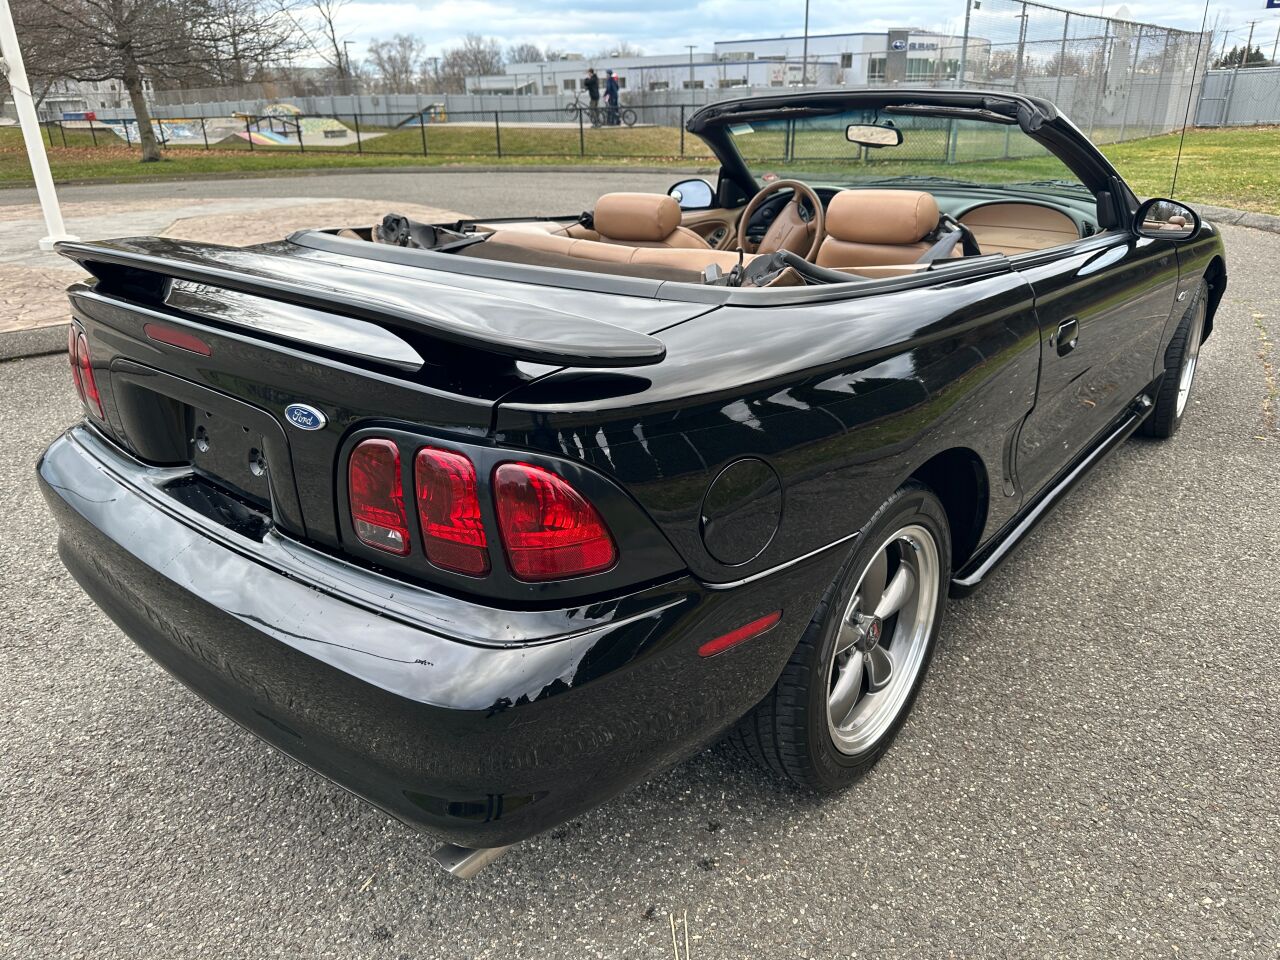 1998 Ford Mustang 6